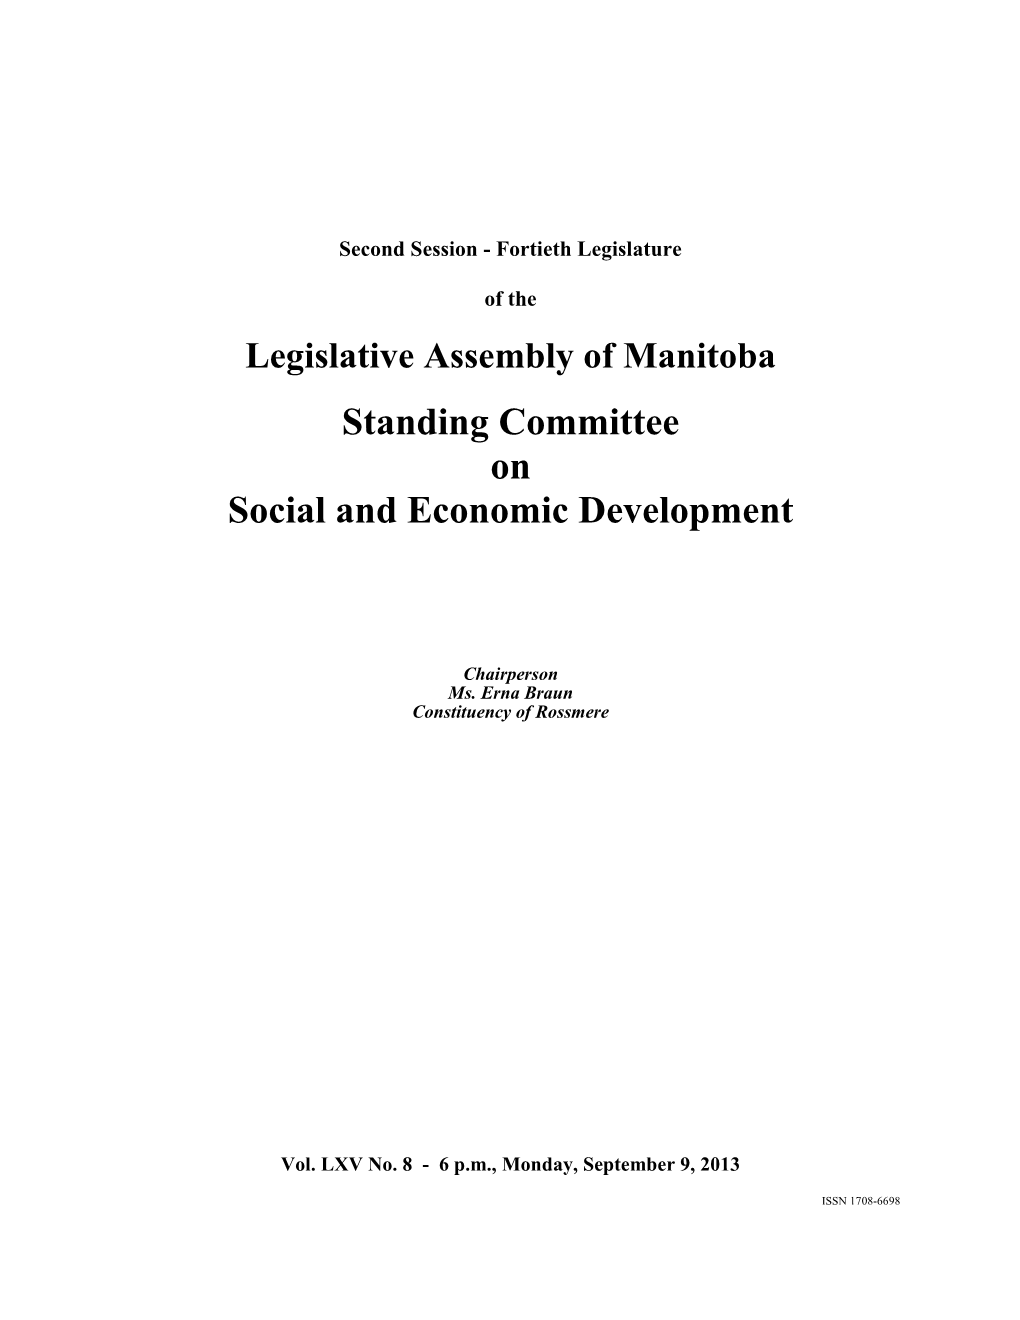 Standing Committee on Social and Economic Development